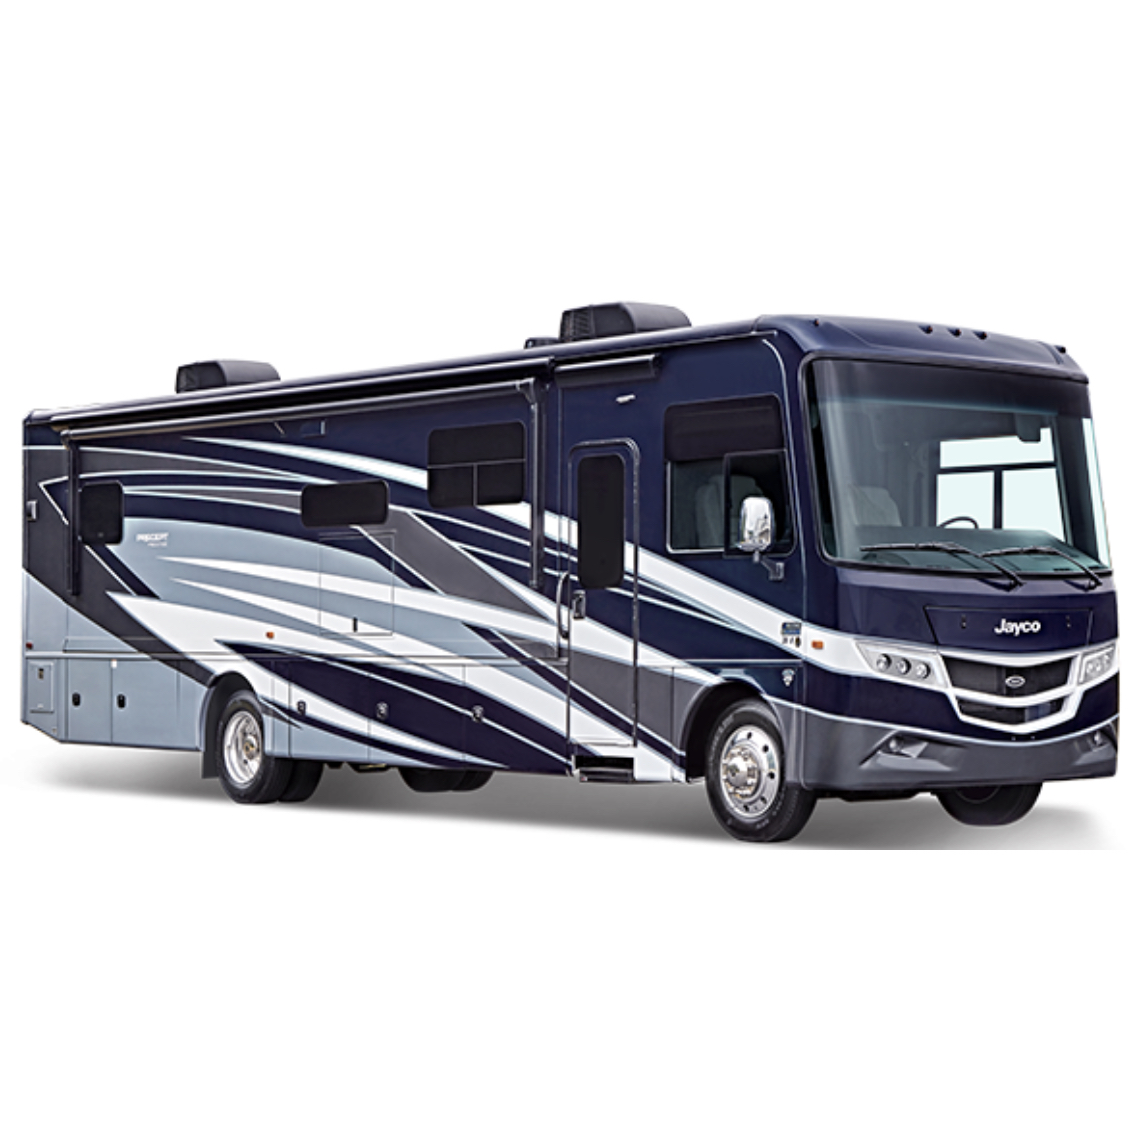 A Jayco RV - Class A - with white background